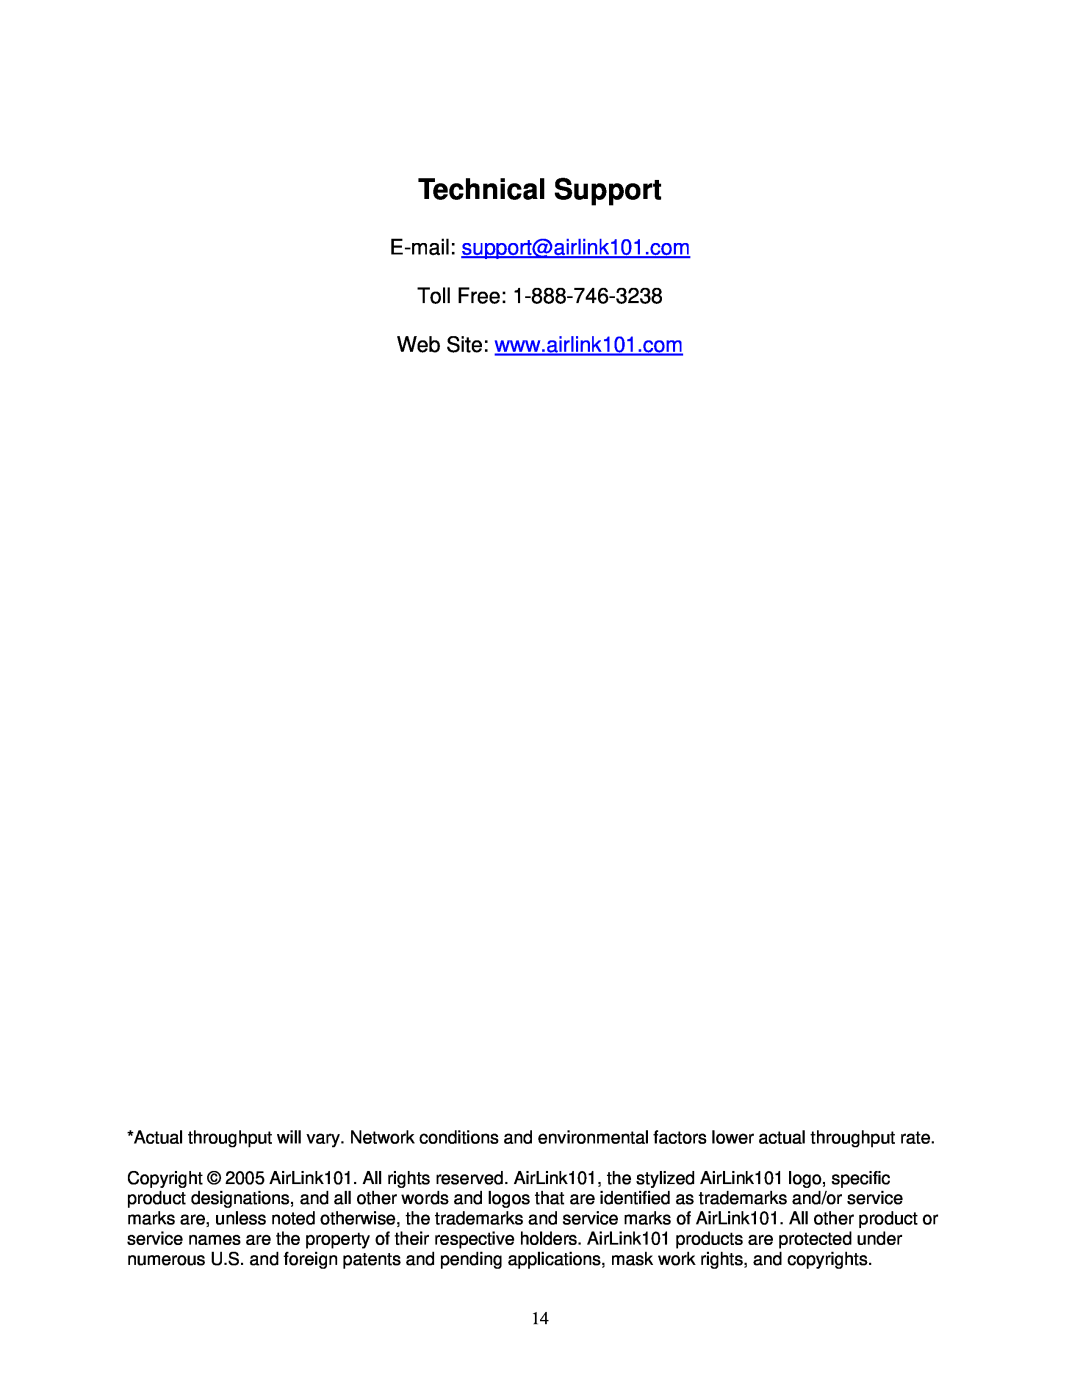 Airlink101 AGIGAUSB user manual Technical Support, Toll Free 